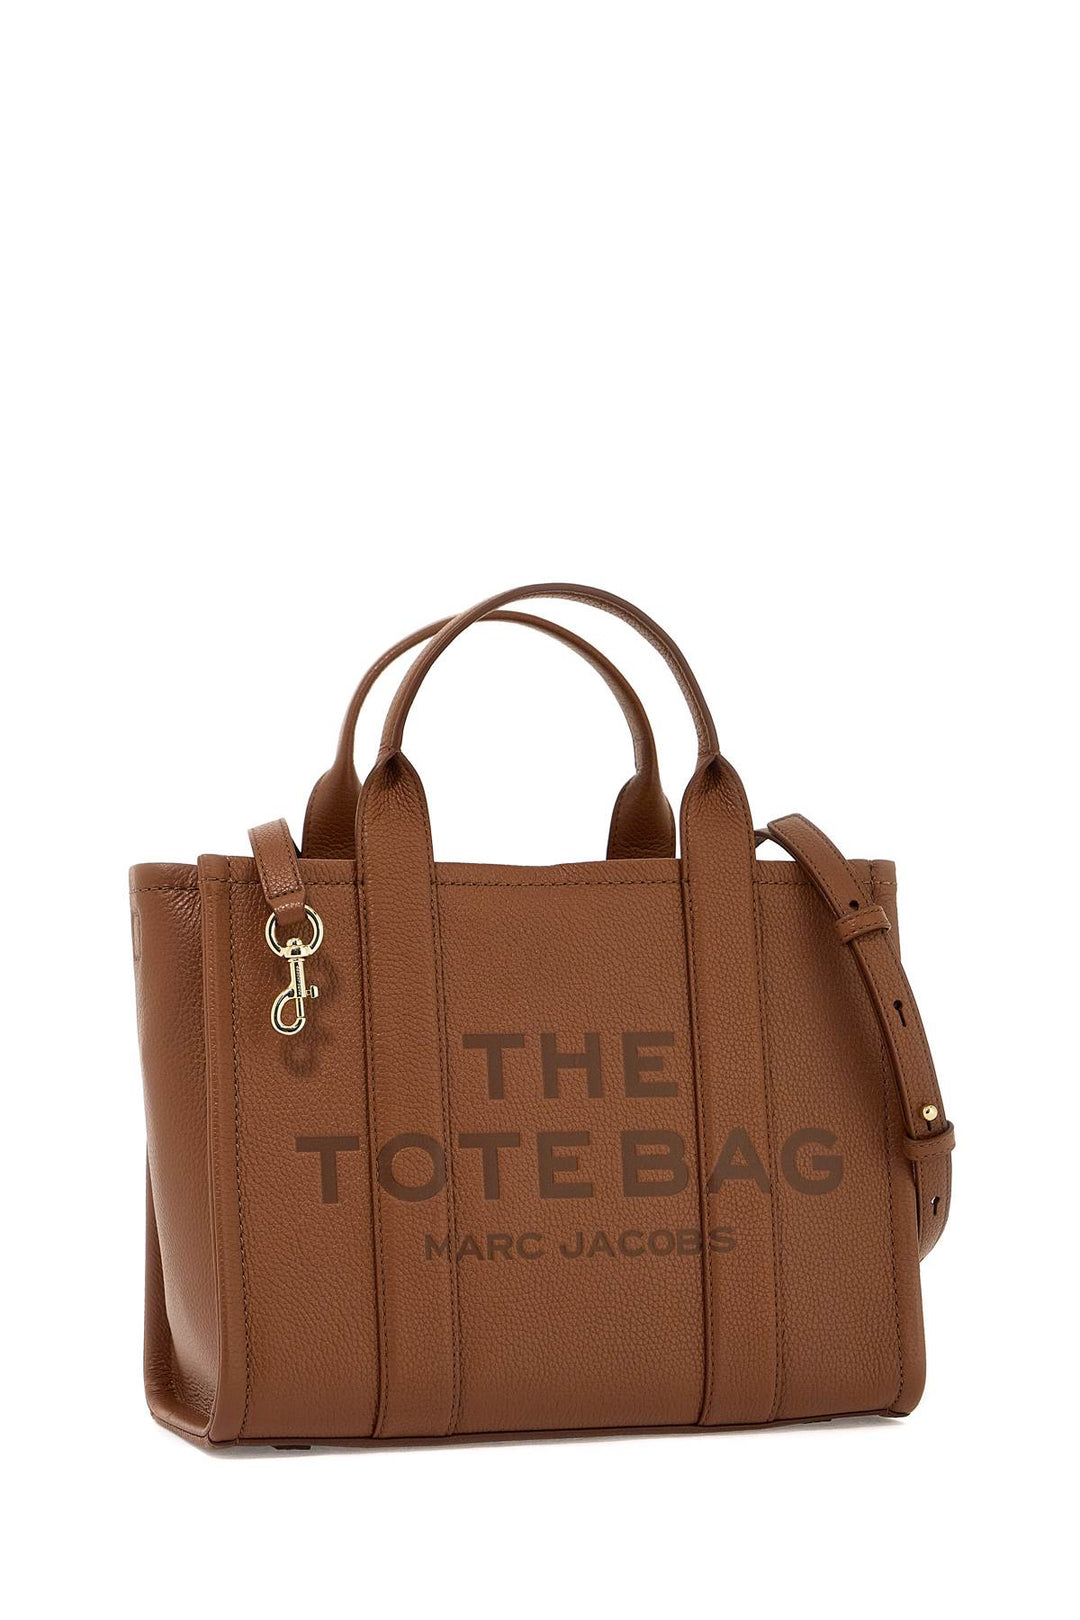 Marc Jacobs The Leather Medium Tote Bag   Brown